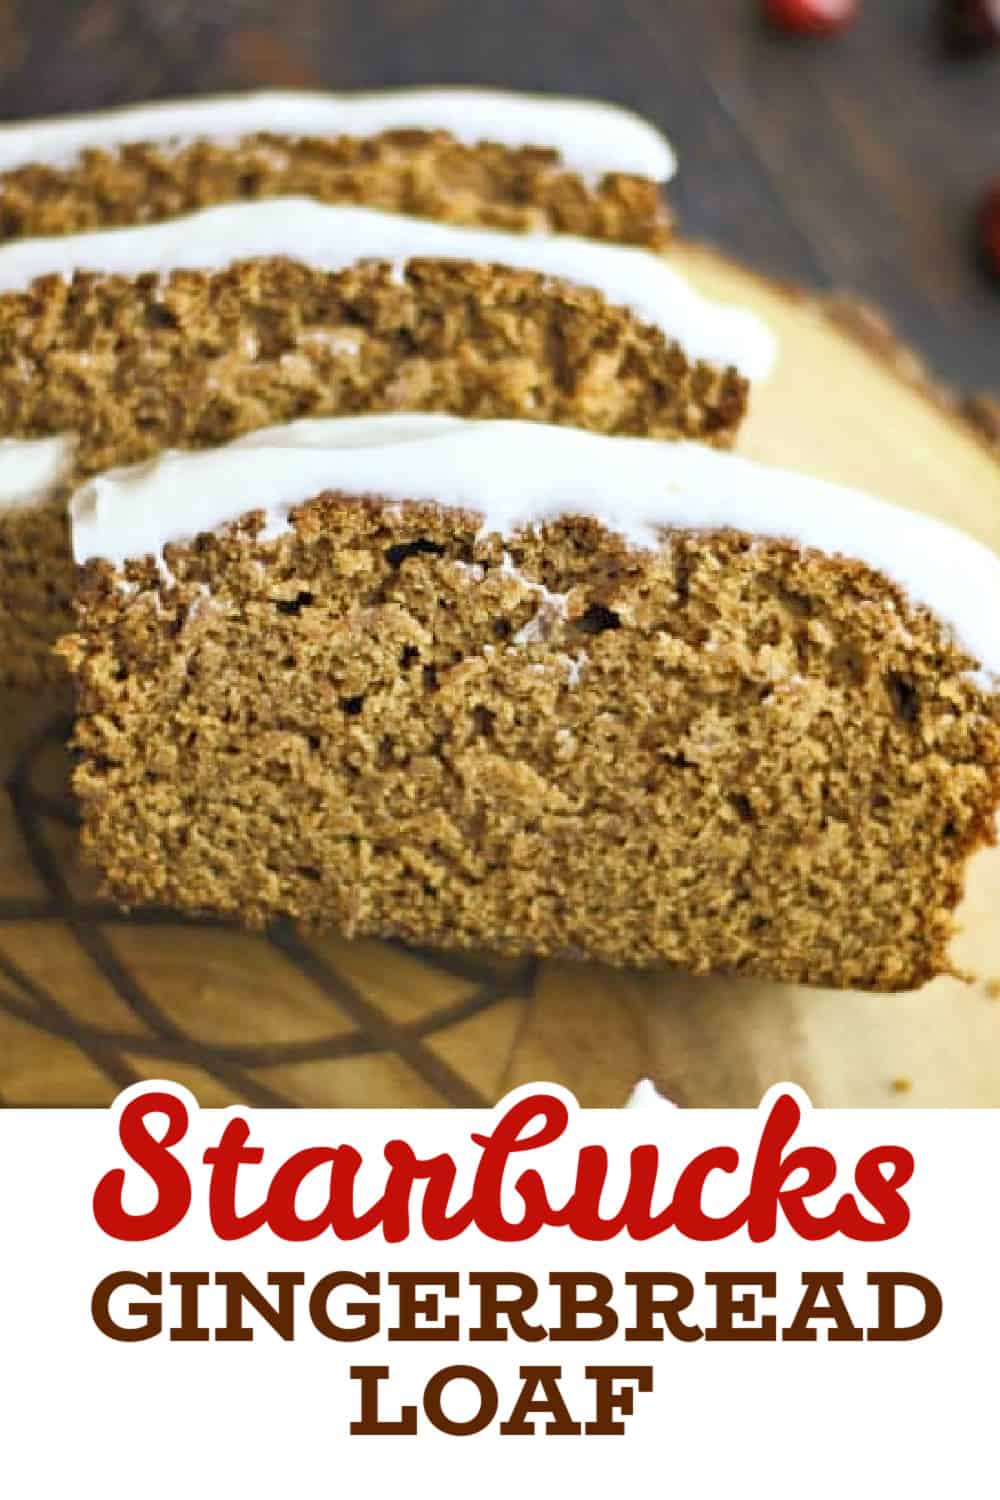 Starbucks GINGERBREAD LOAF RECIPE WITH CREAM CHEESE FROSTING
